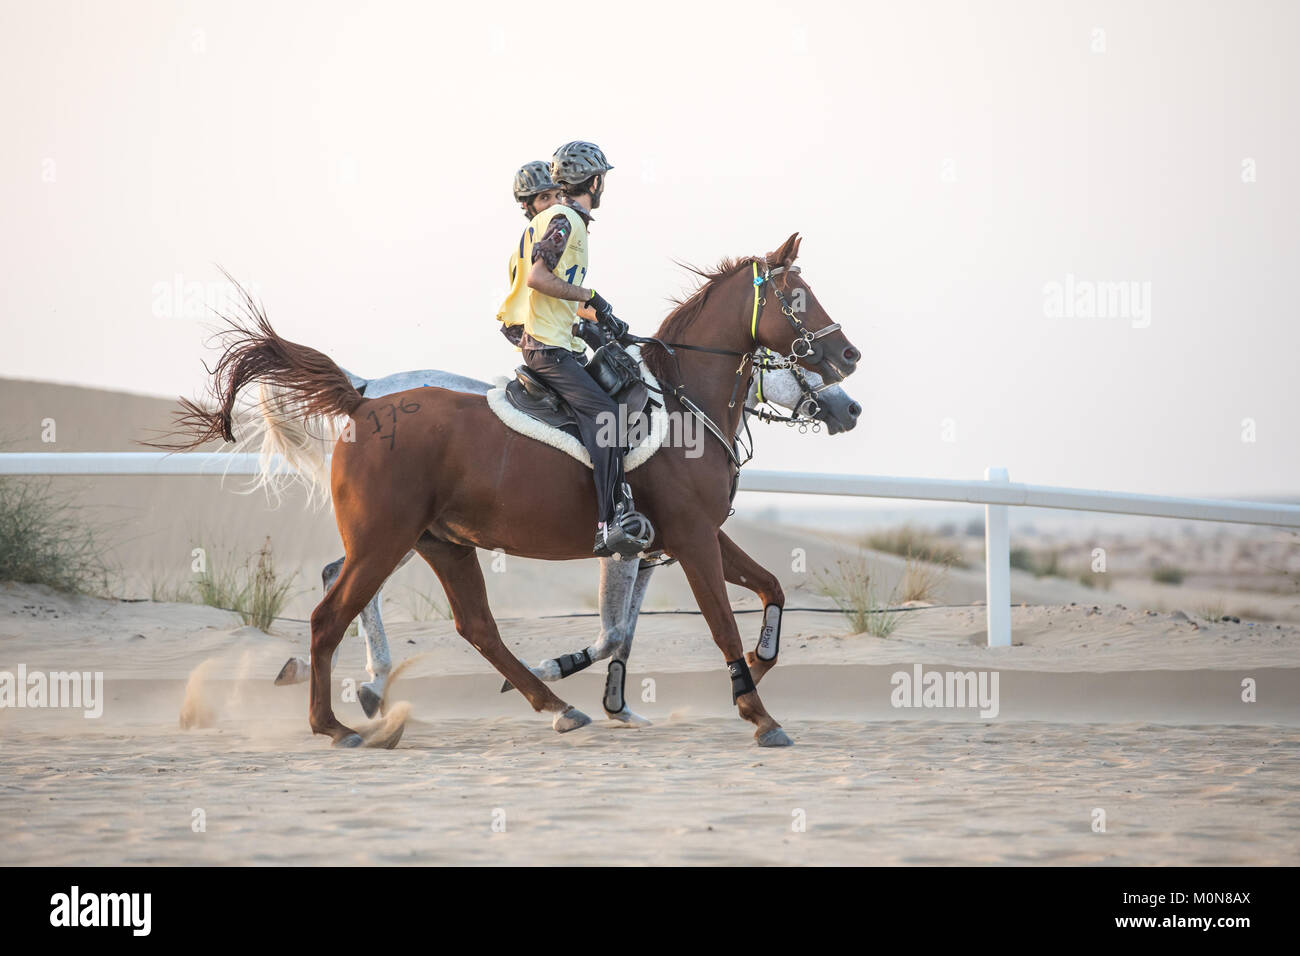 Two riders competing in an endurance horse race. Dubai, UAE. Stock Photo